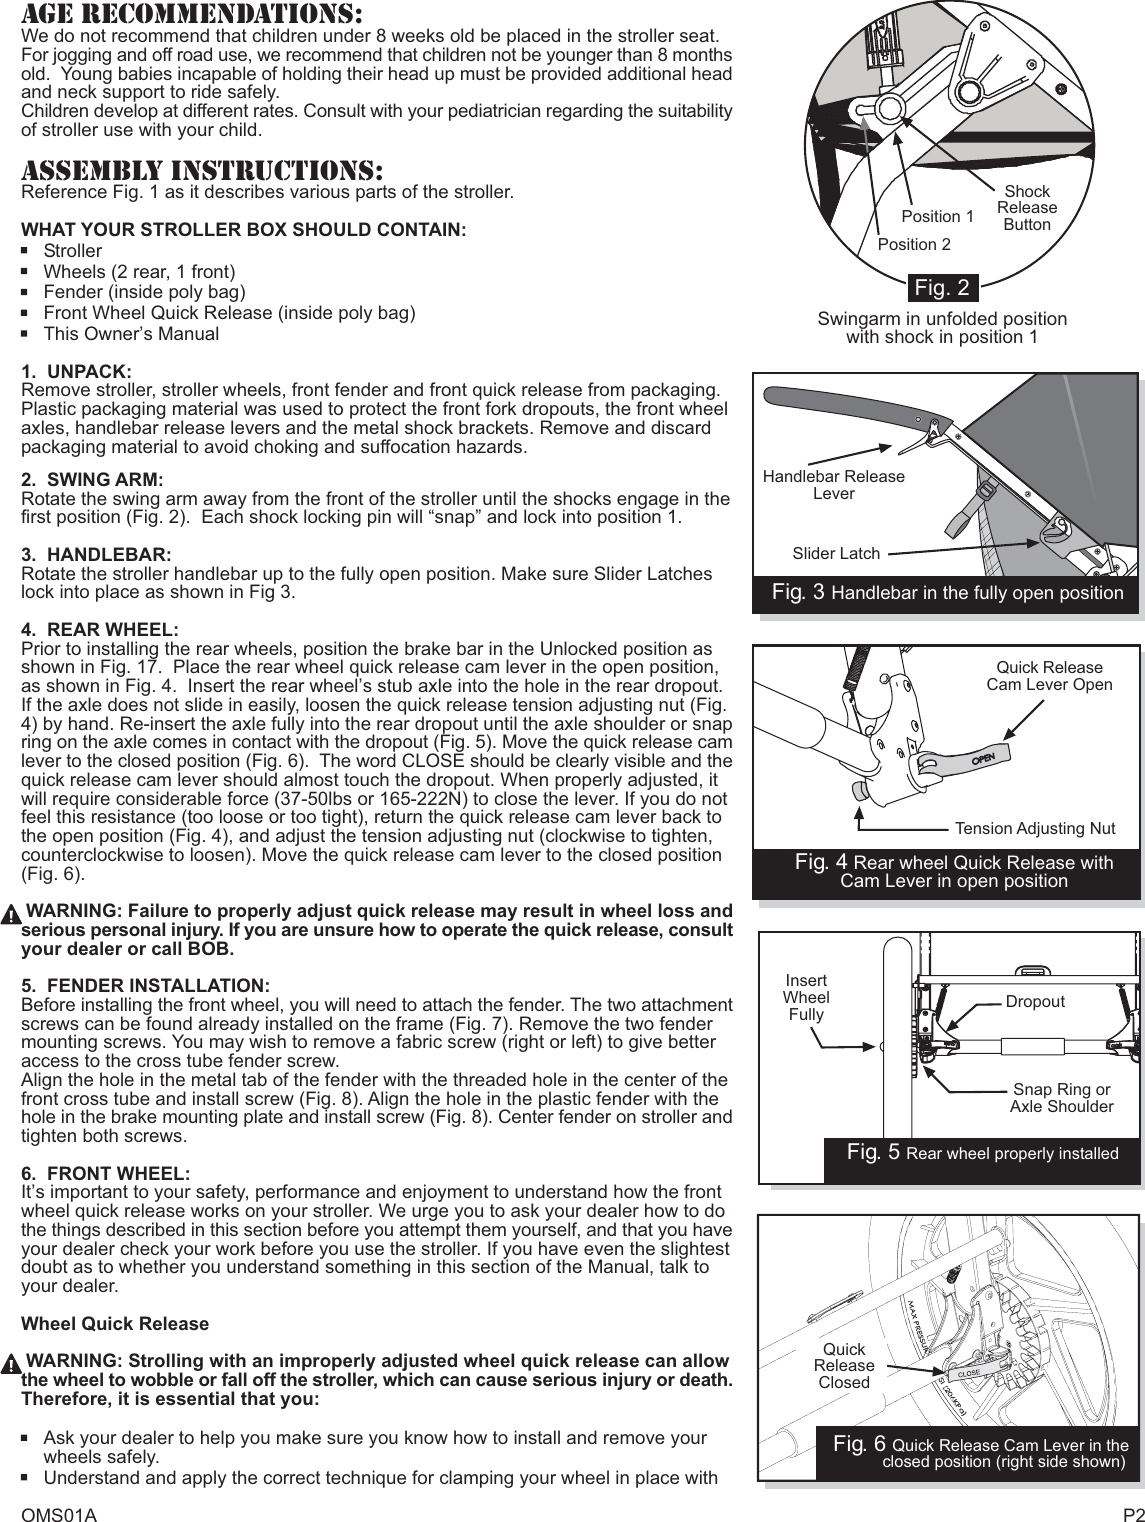 Page 2 of 7 - Bob Bob-Oms09B-Users-Manual- OMS01A.FH7  Bob-oms09b-users-manual